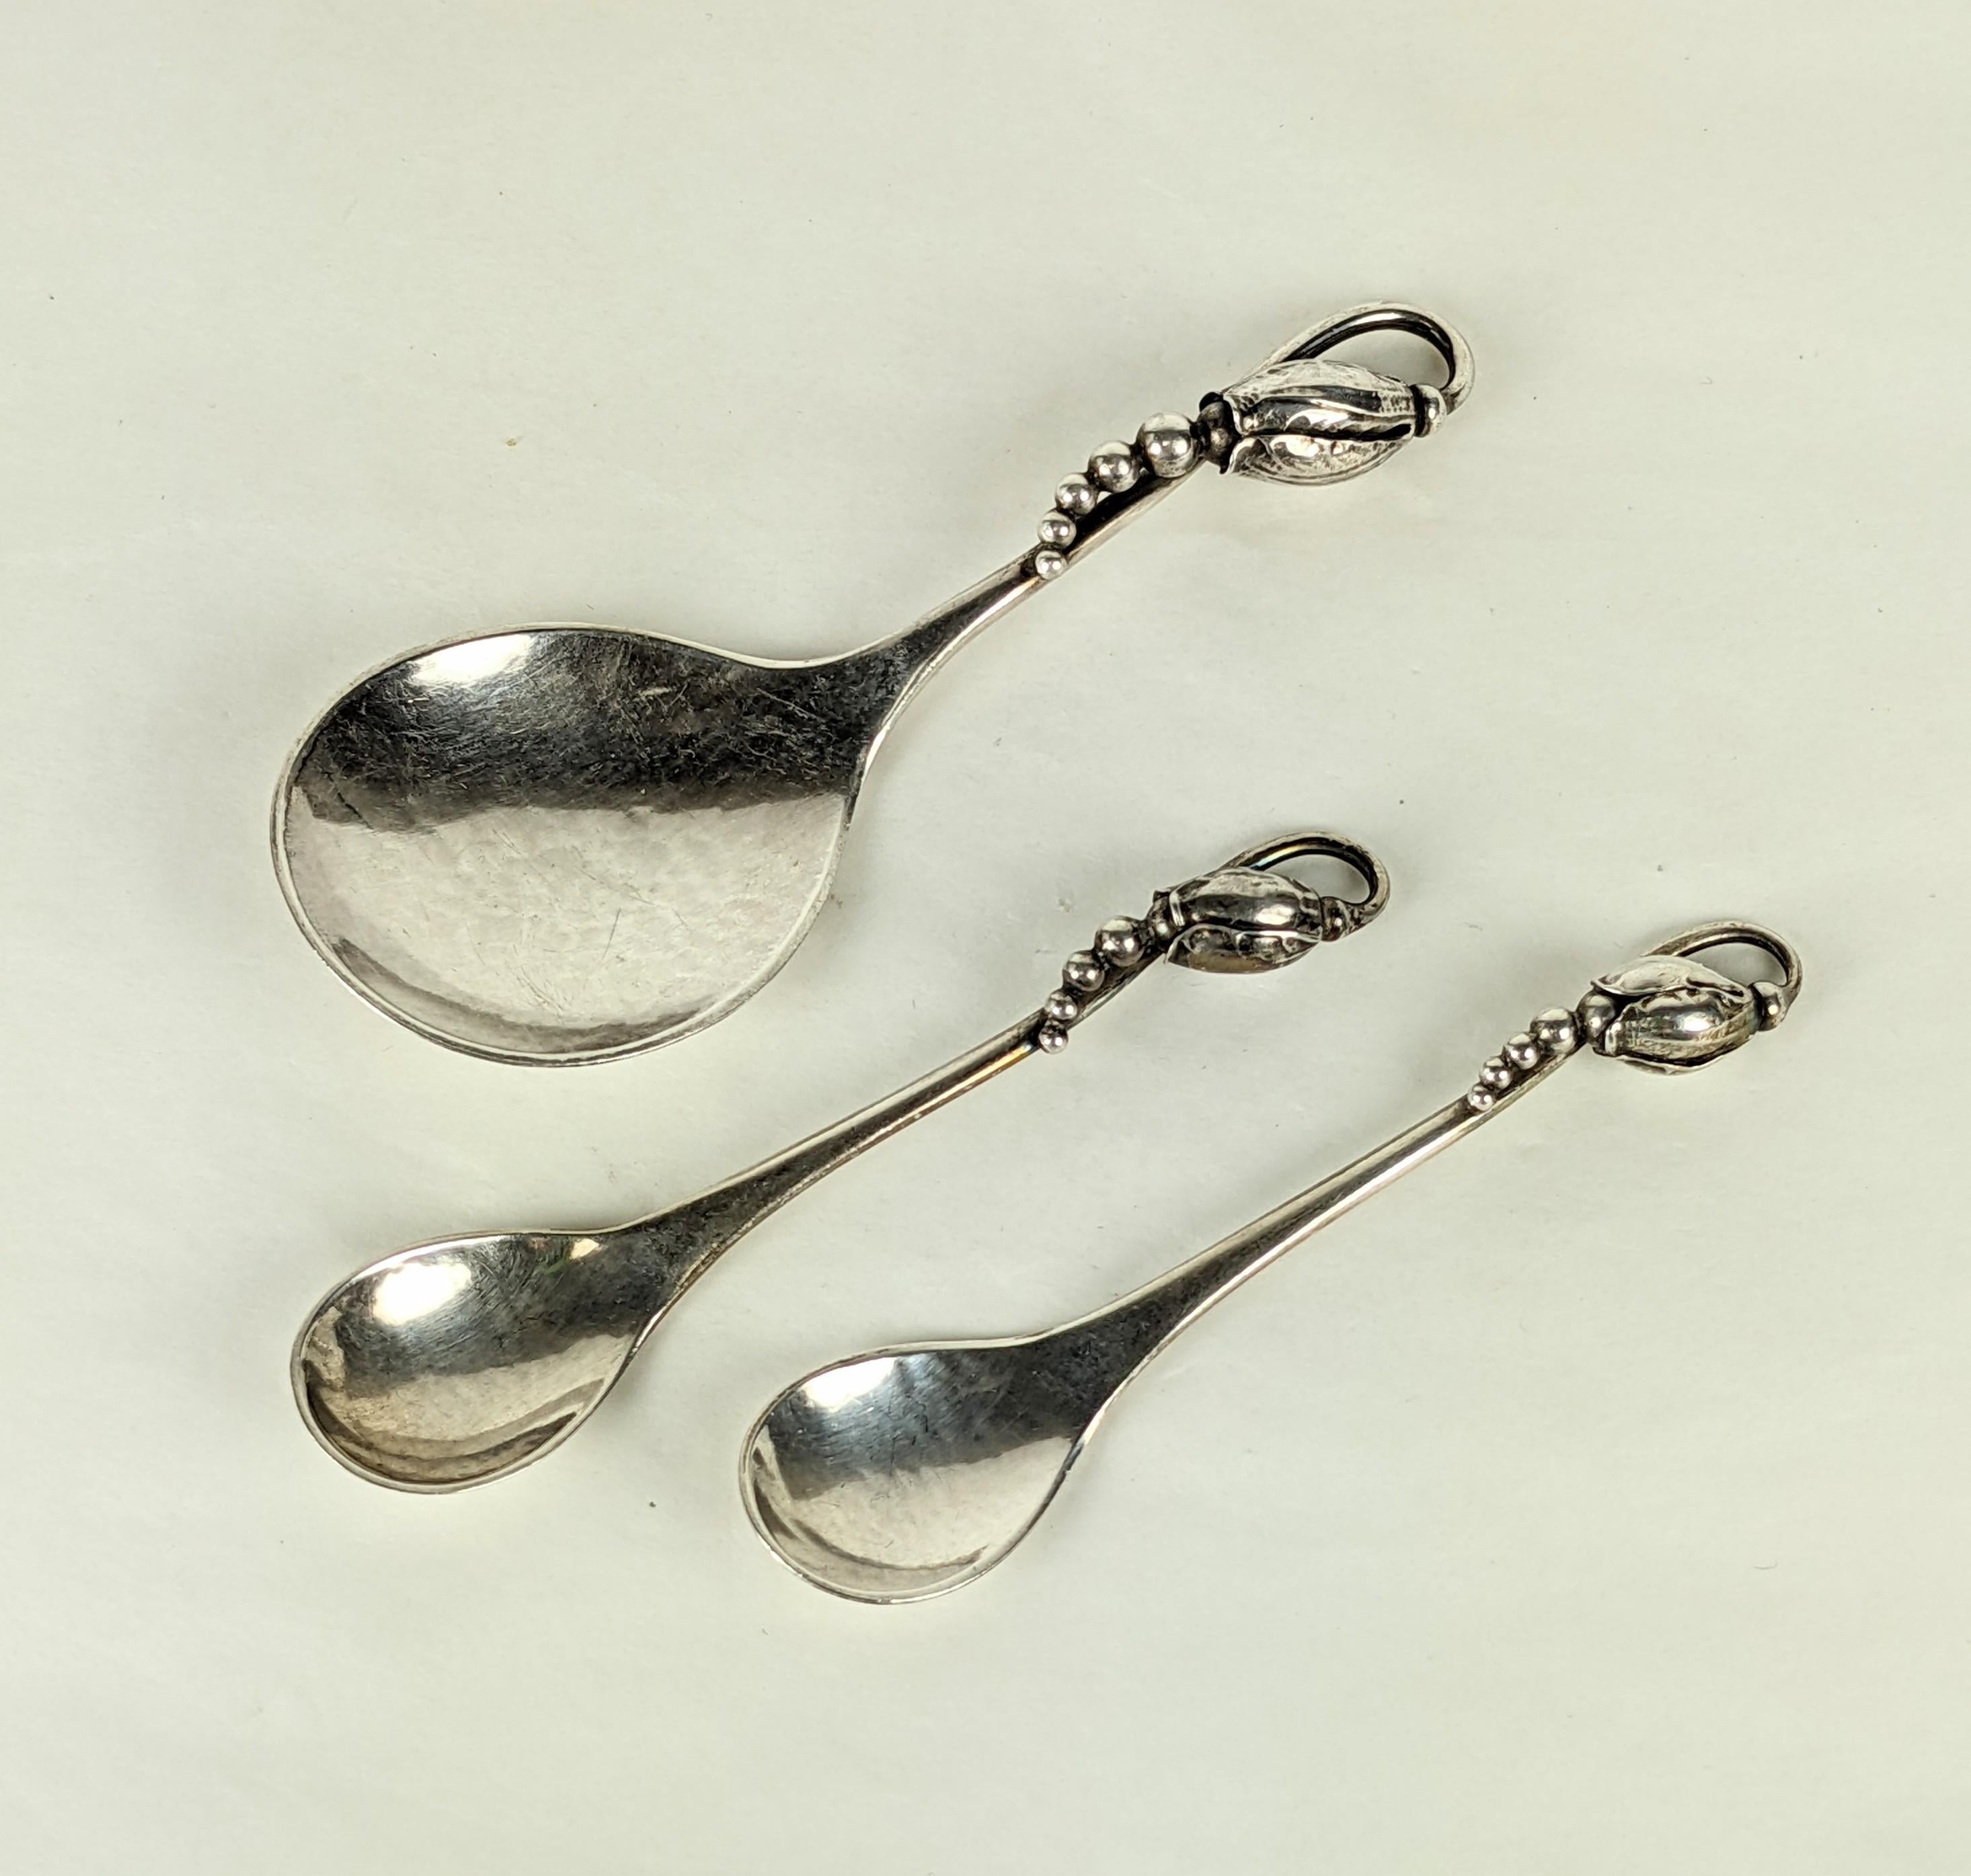 Set of 3 Georg Jensen handmade sterling serving pieces with early hallmarks in the Blossom pattern. A pair of master salt spoons and candy server. 1940's Denmark. 
3 pieces total. Smaller 3.5